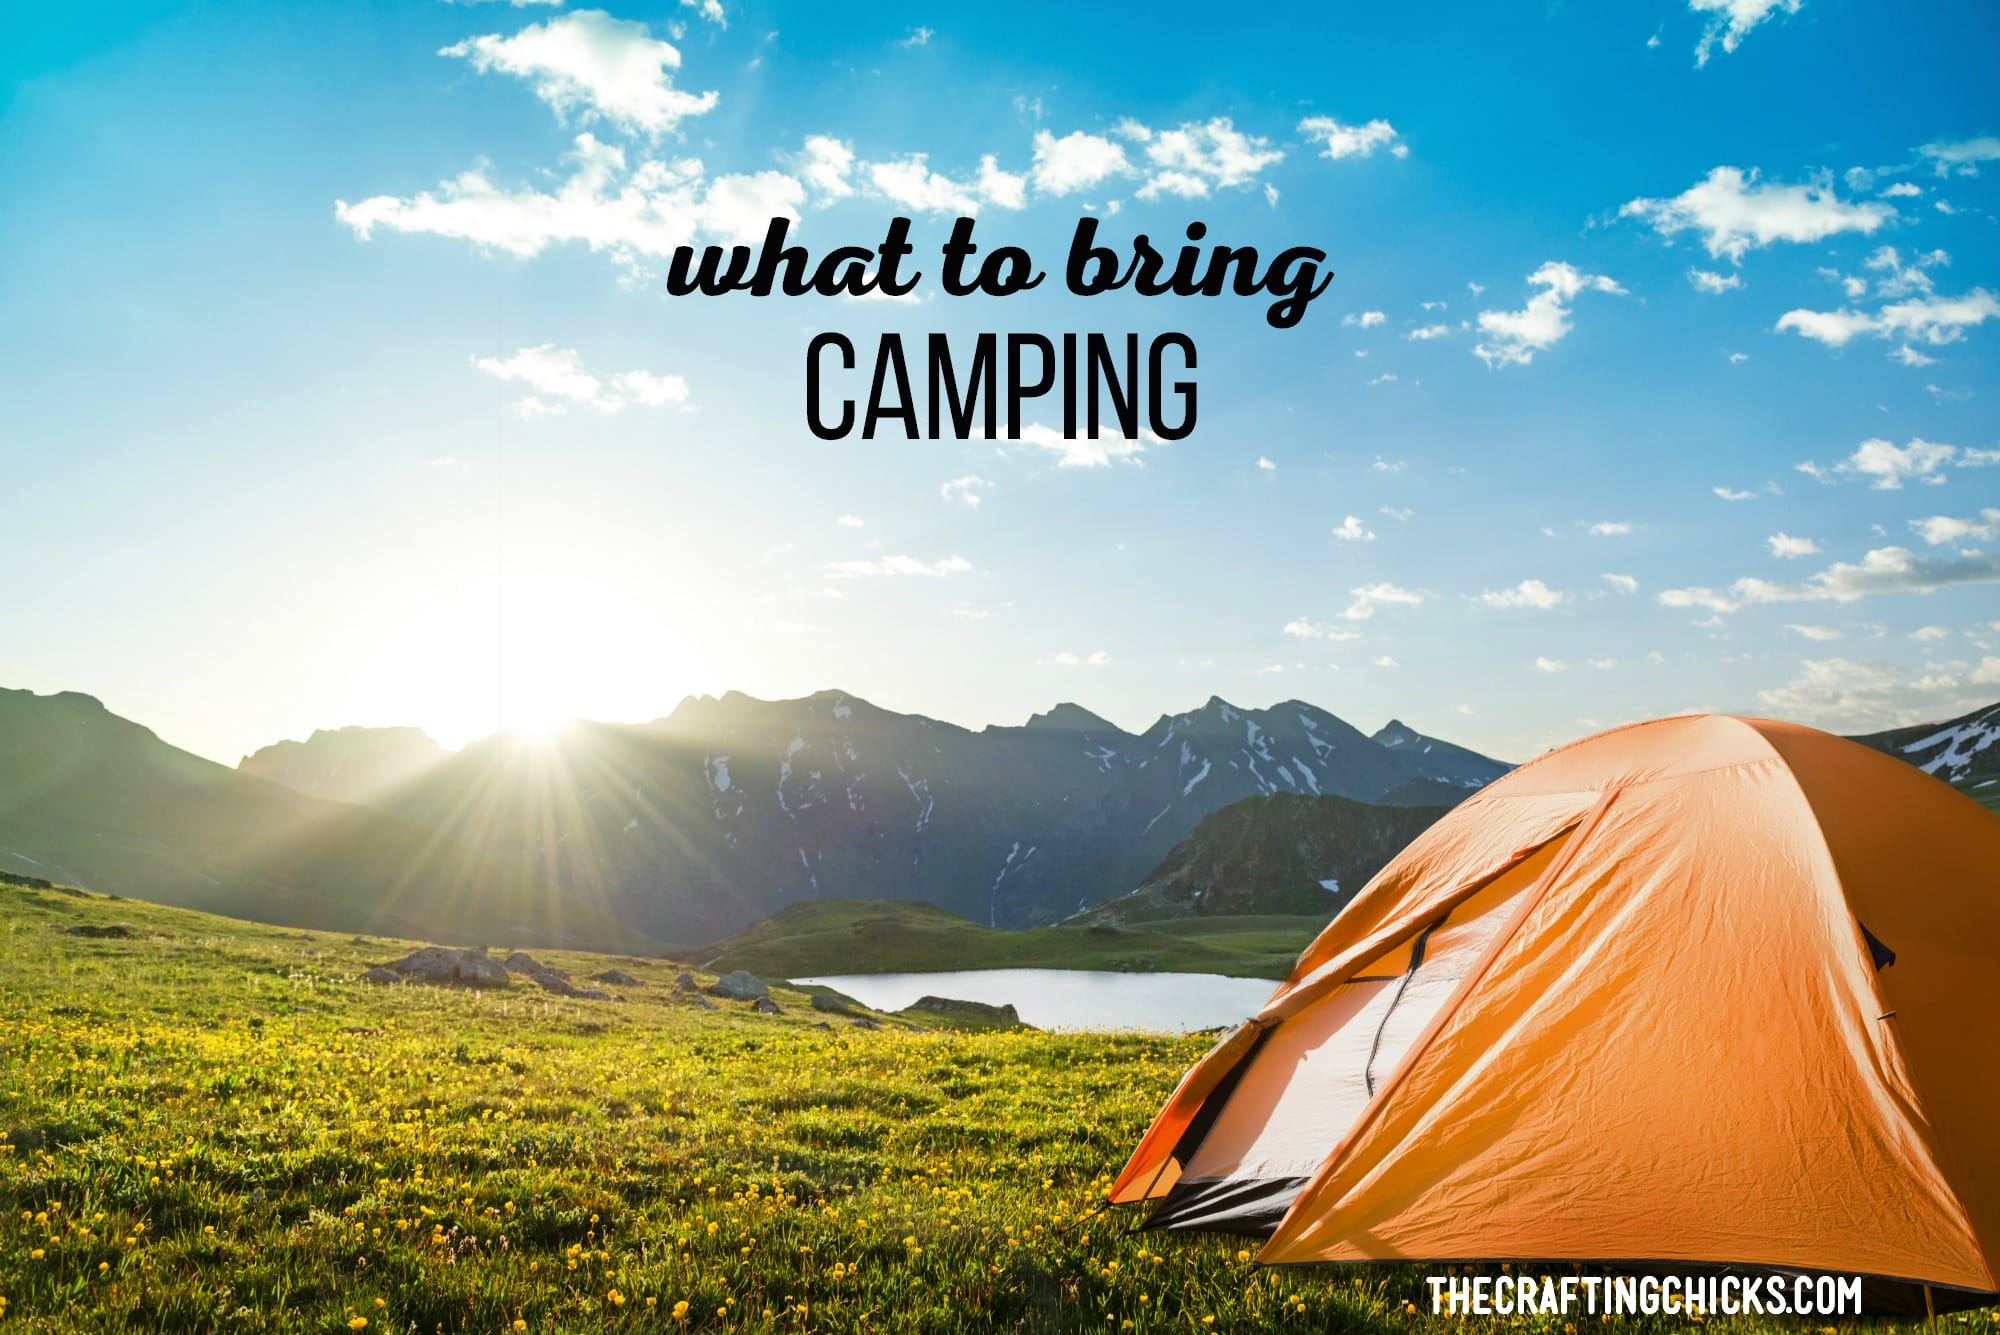 What to Bring Camping | Camping season is here! We should start planning what to bring camping because you can never start preparing too soon... especially if you have a family to bring along. Here's our list of What to Bring Camping. #camping #packing #tips